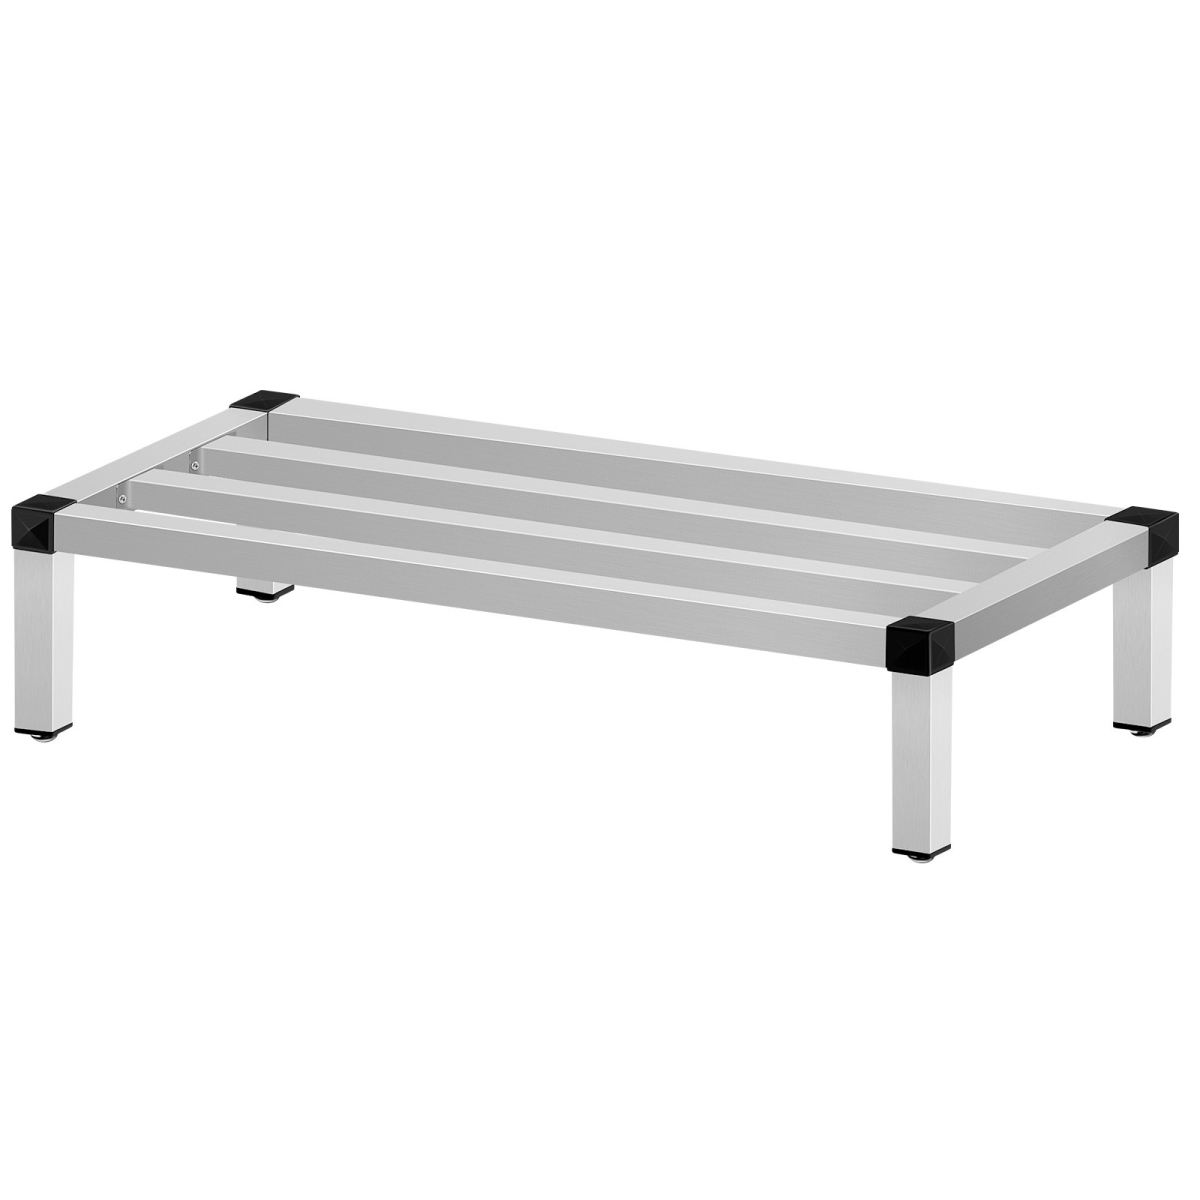 Picture of Vevor LHJZWJ122X51X2001V0 48 x 20 in. Aluminum Dunnage Rack - 1500 lbs